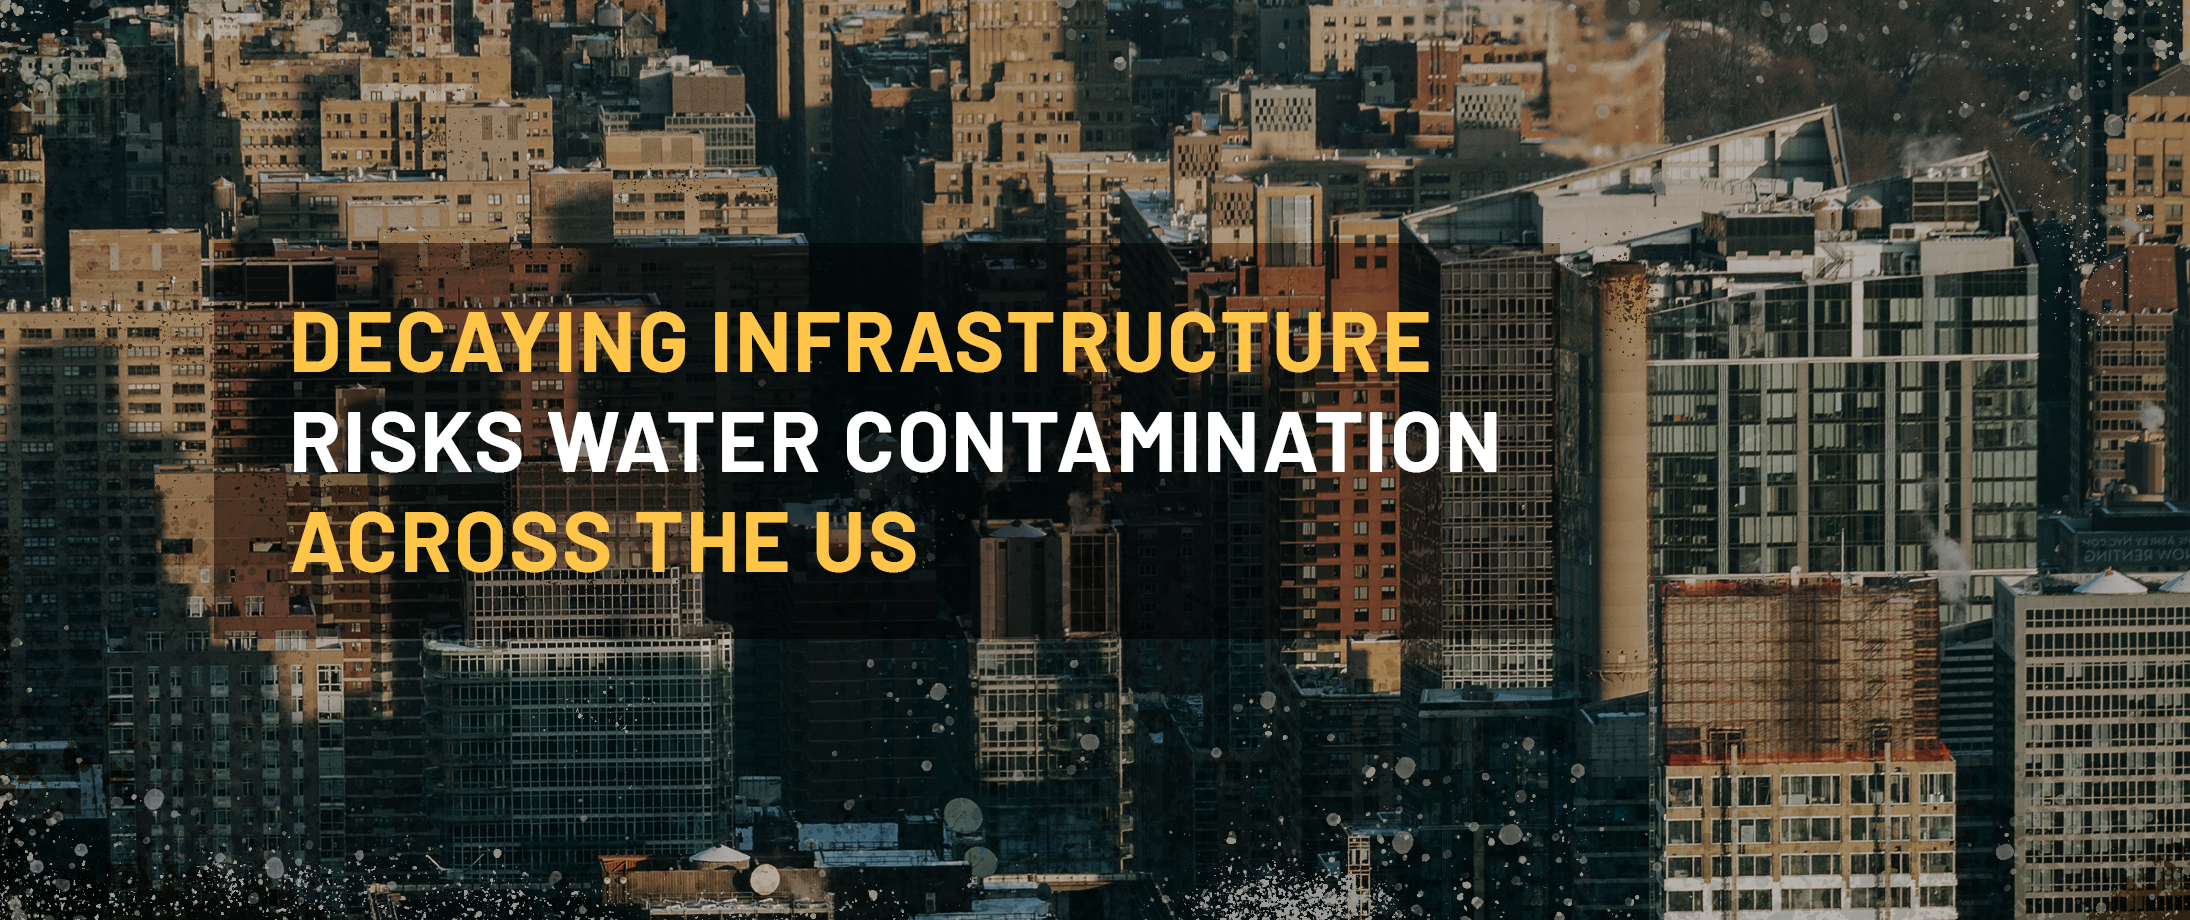 Decaying Infrastructure Risks Water Contamination Across the US